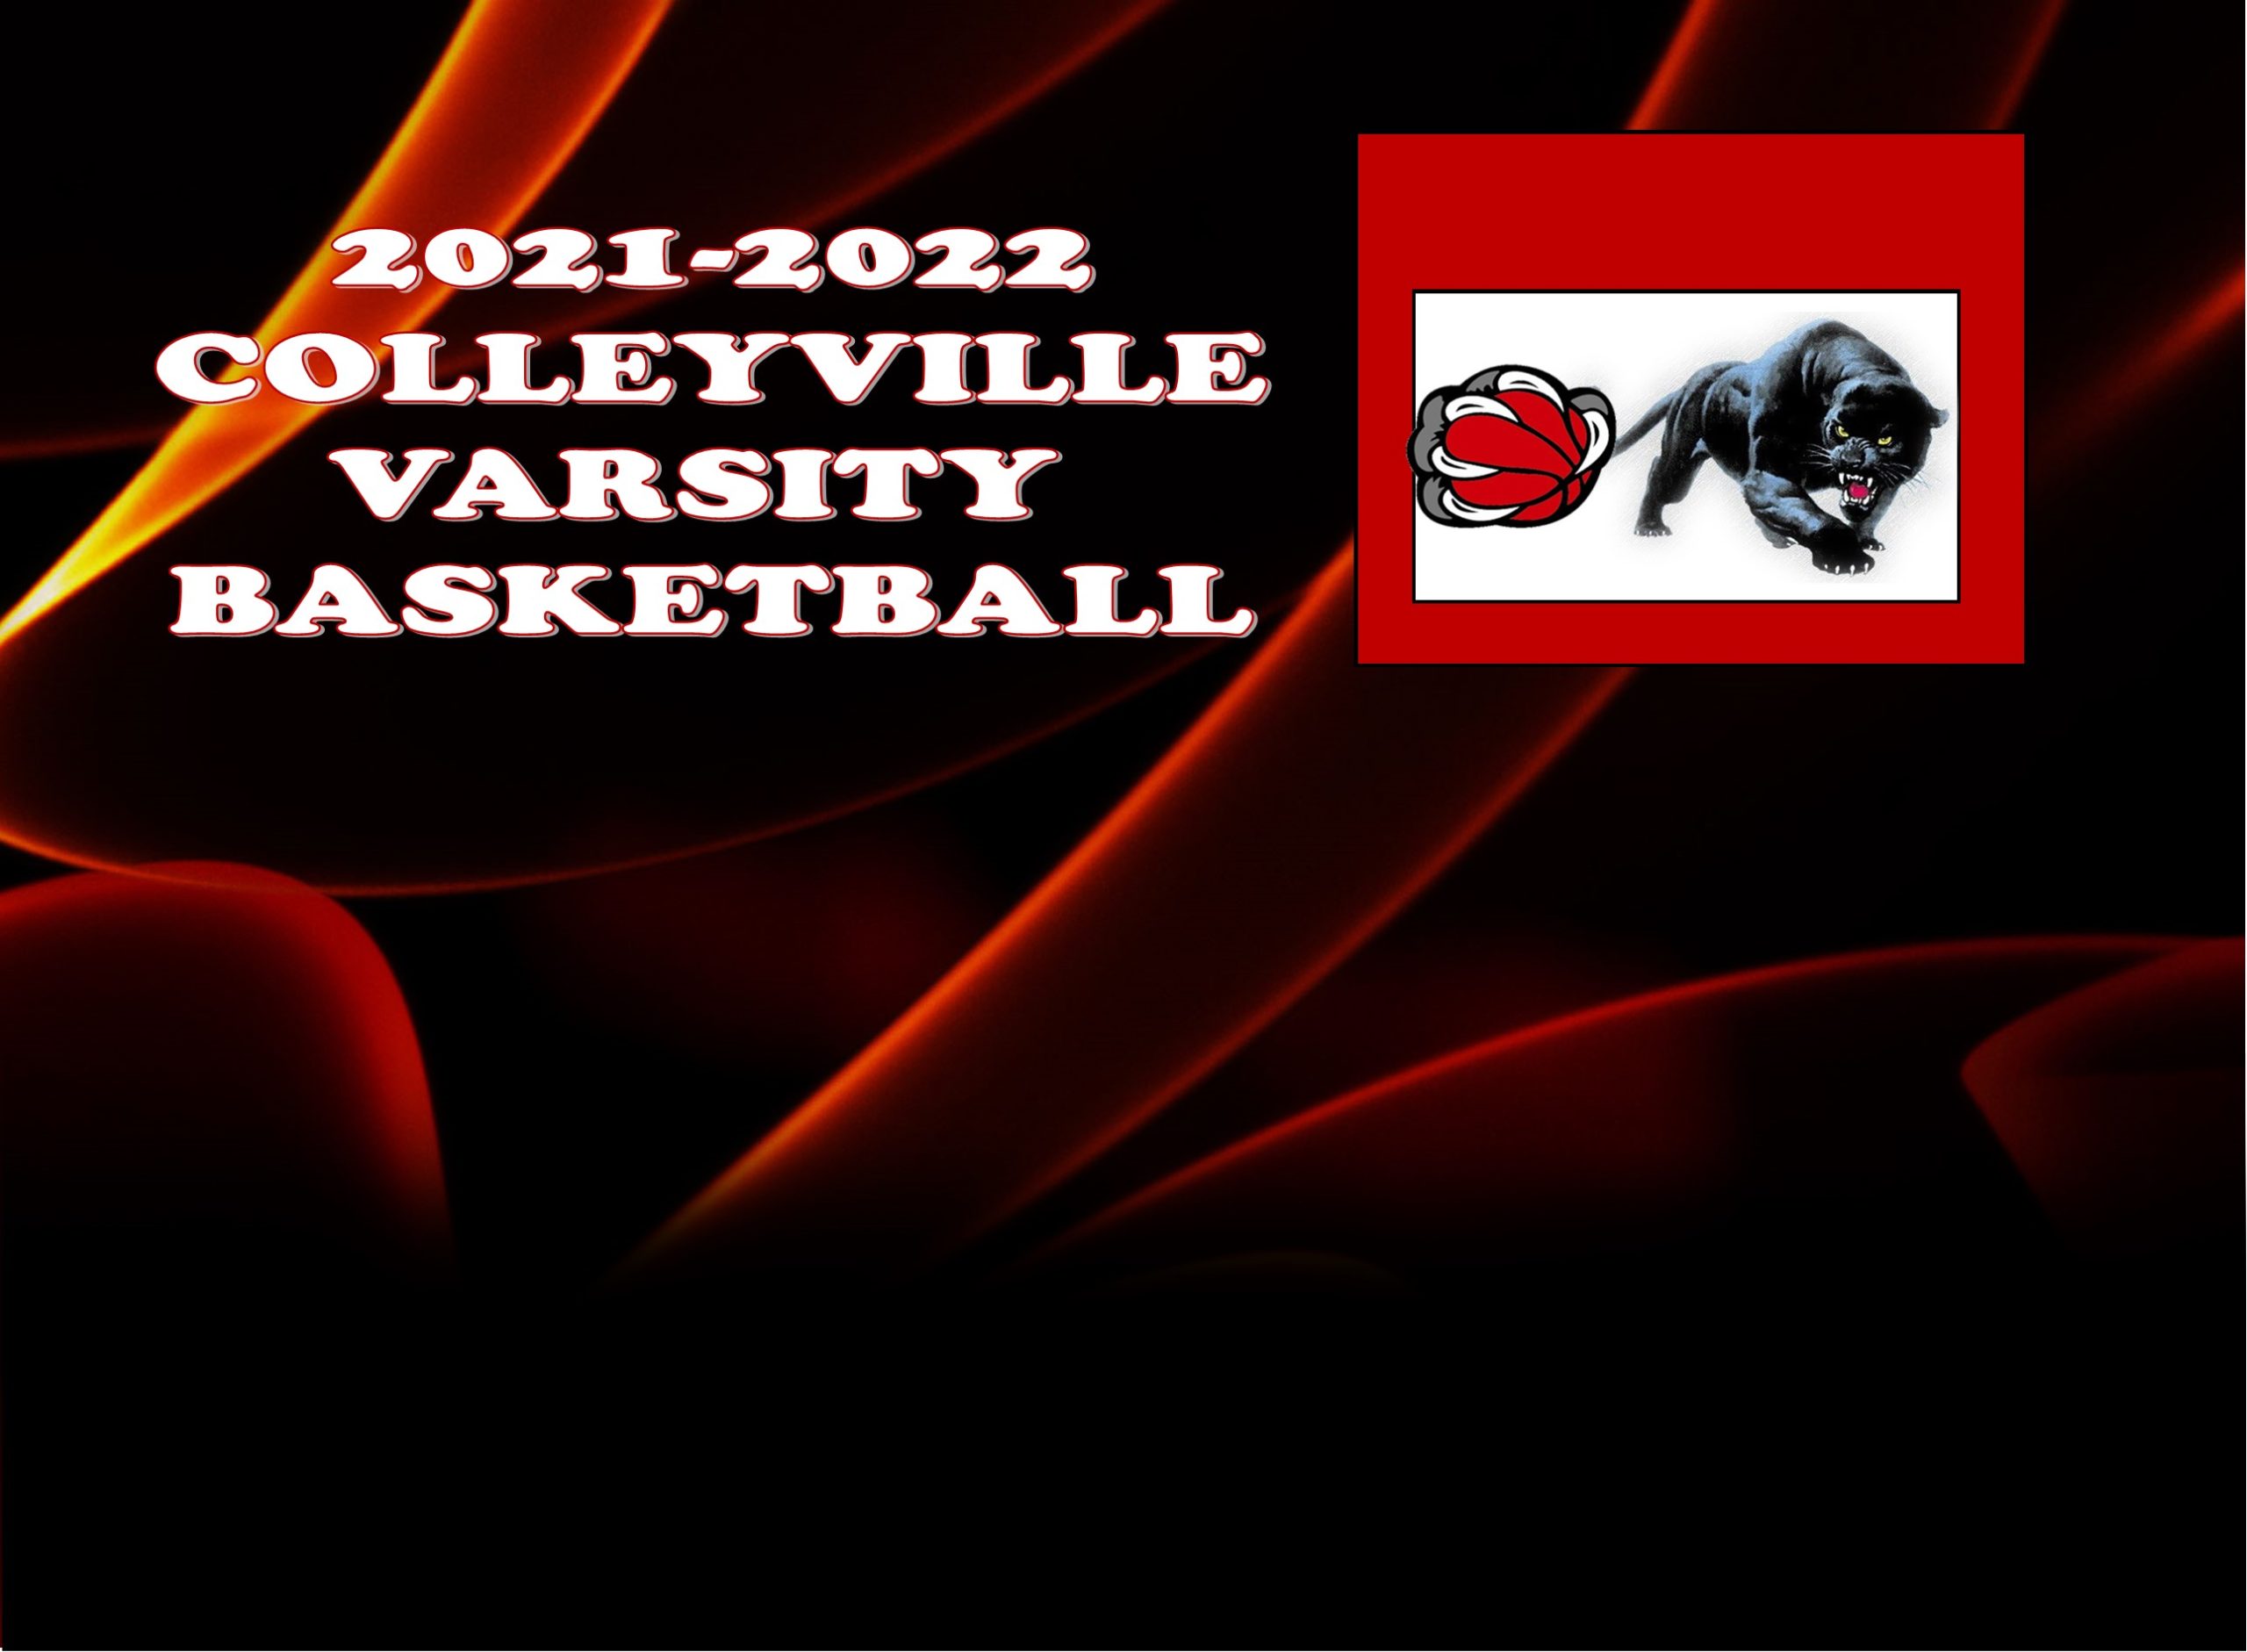 GCISD Basketball: Colleyville Panthers Overwhelmed by the Richland Royals 58-45